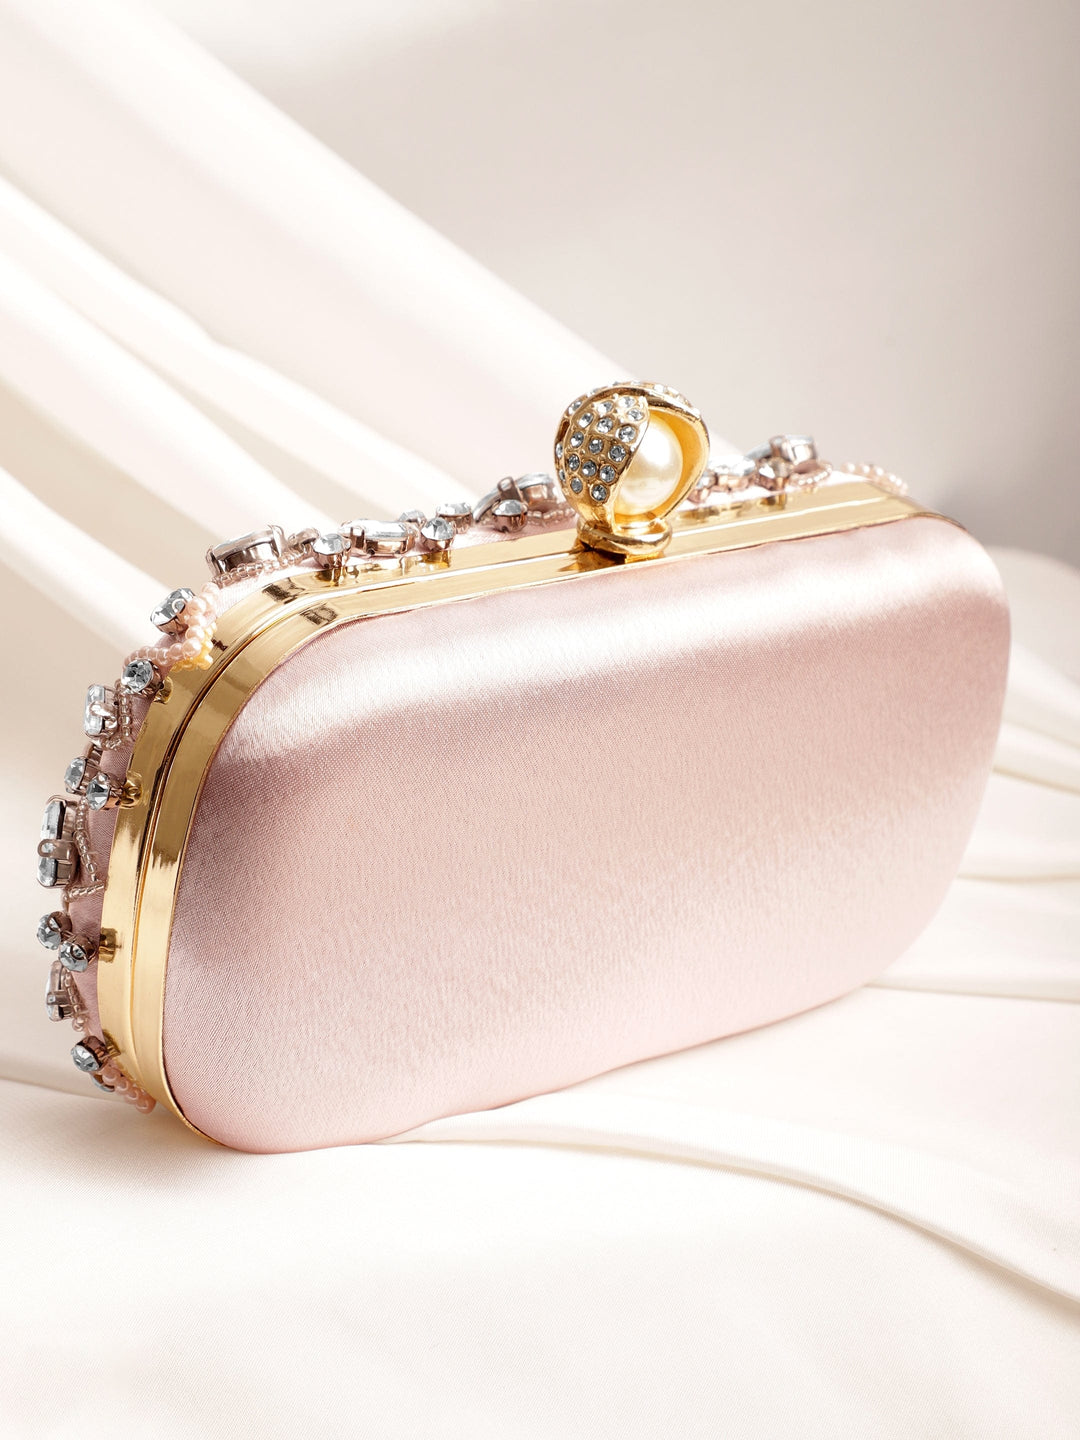 Rubans Pink bag studded with bold crystals exquisite clutch handbag Clutches